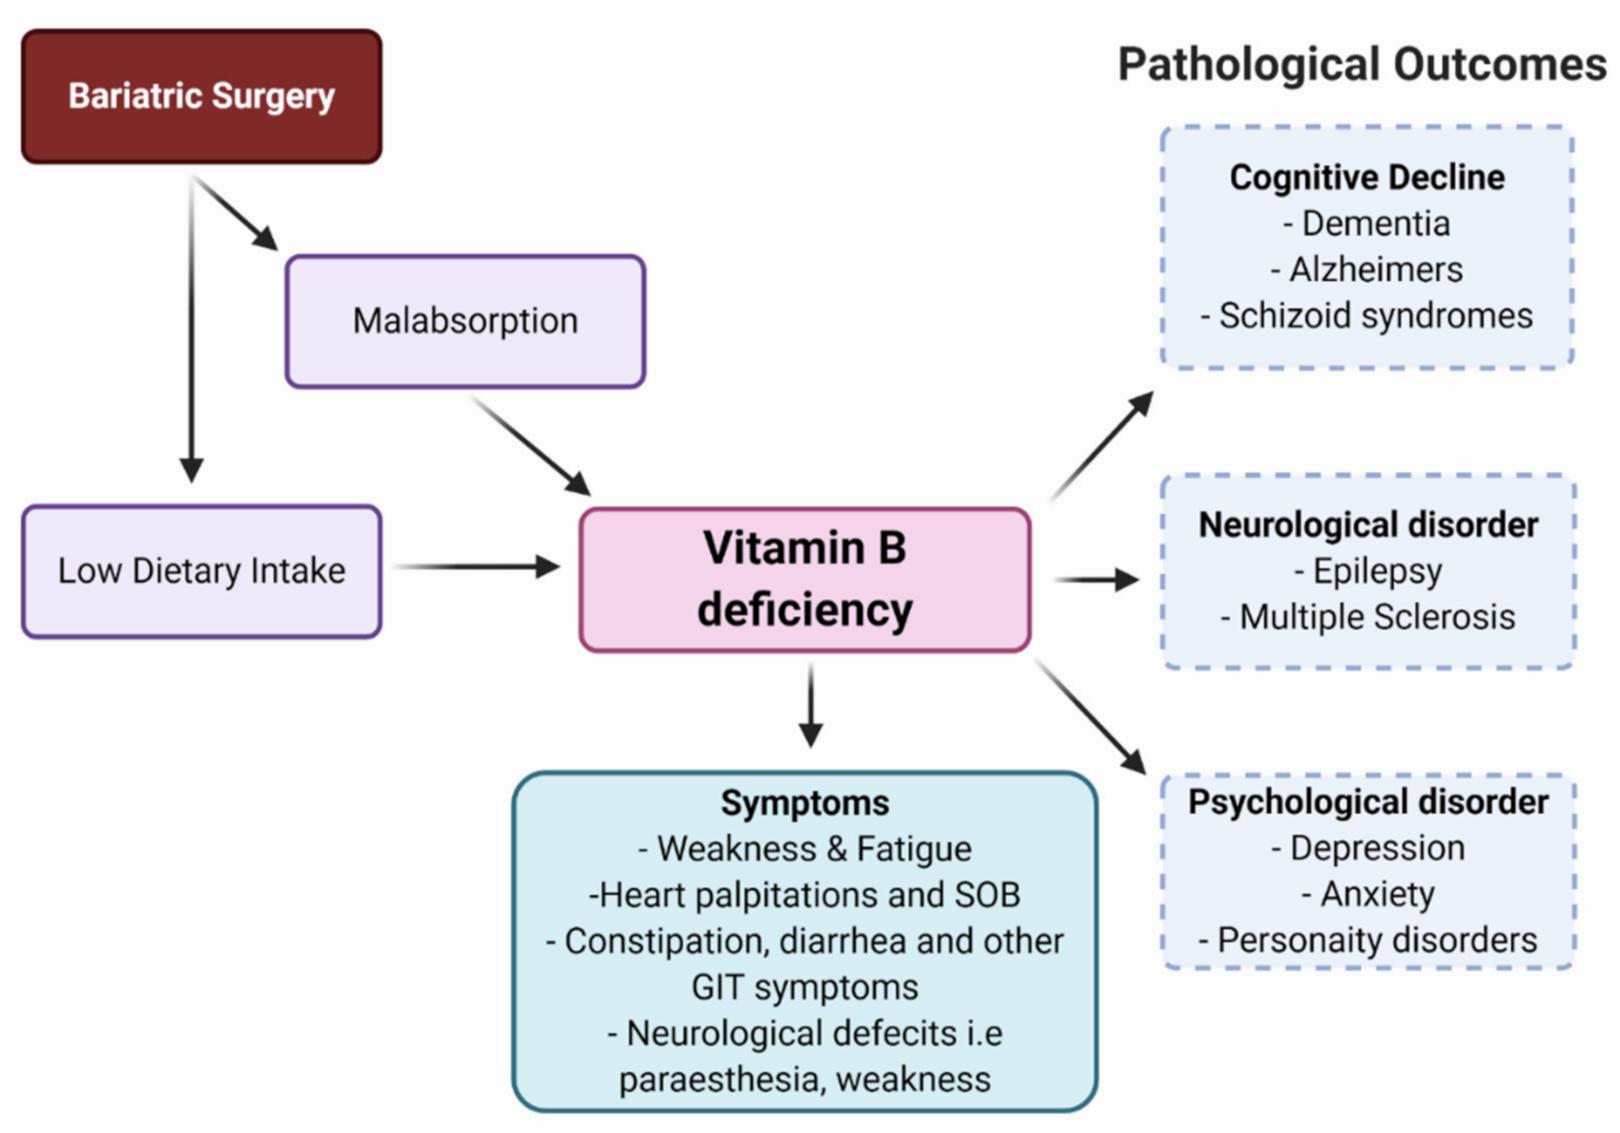 A flowchart showing the relationship between bariatric surgery, vitamin B deficiency, and various pathological outcomes.